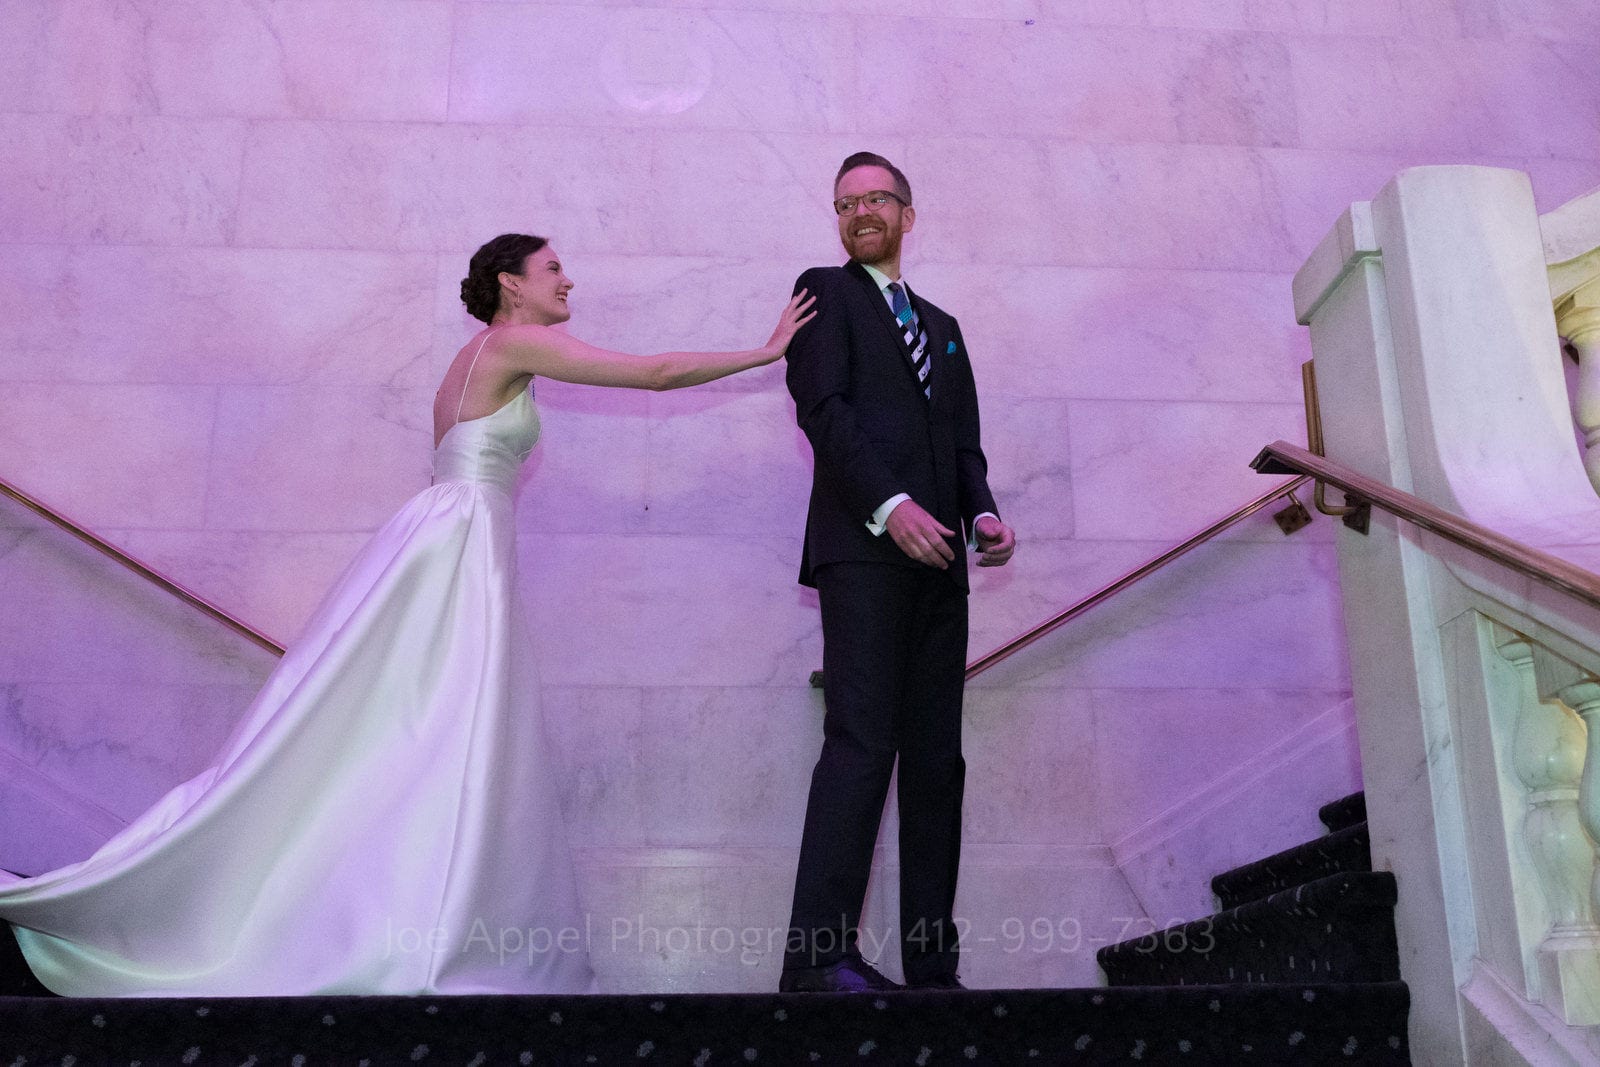 A bride reaches out to touch her groom as they stand on the landing of the grand staircase at The Renaissance hotel in Pittsburgh. The purple room light is reflected on the white marble around them.